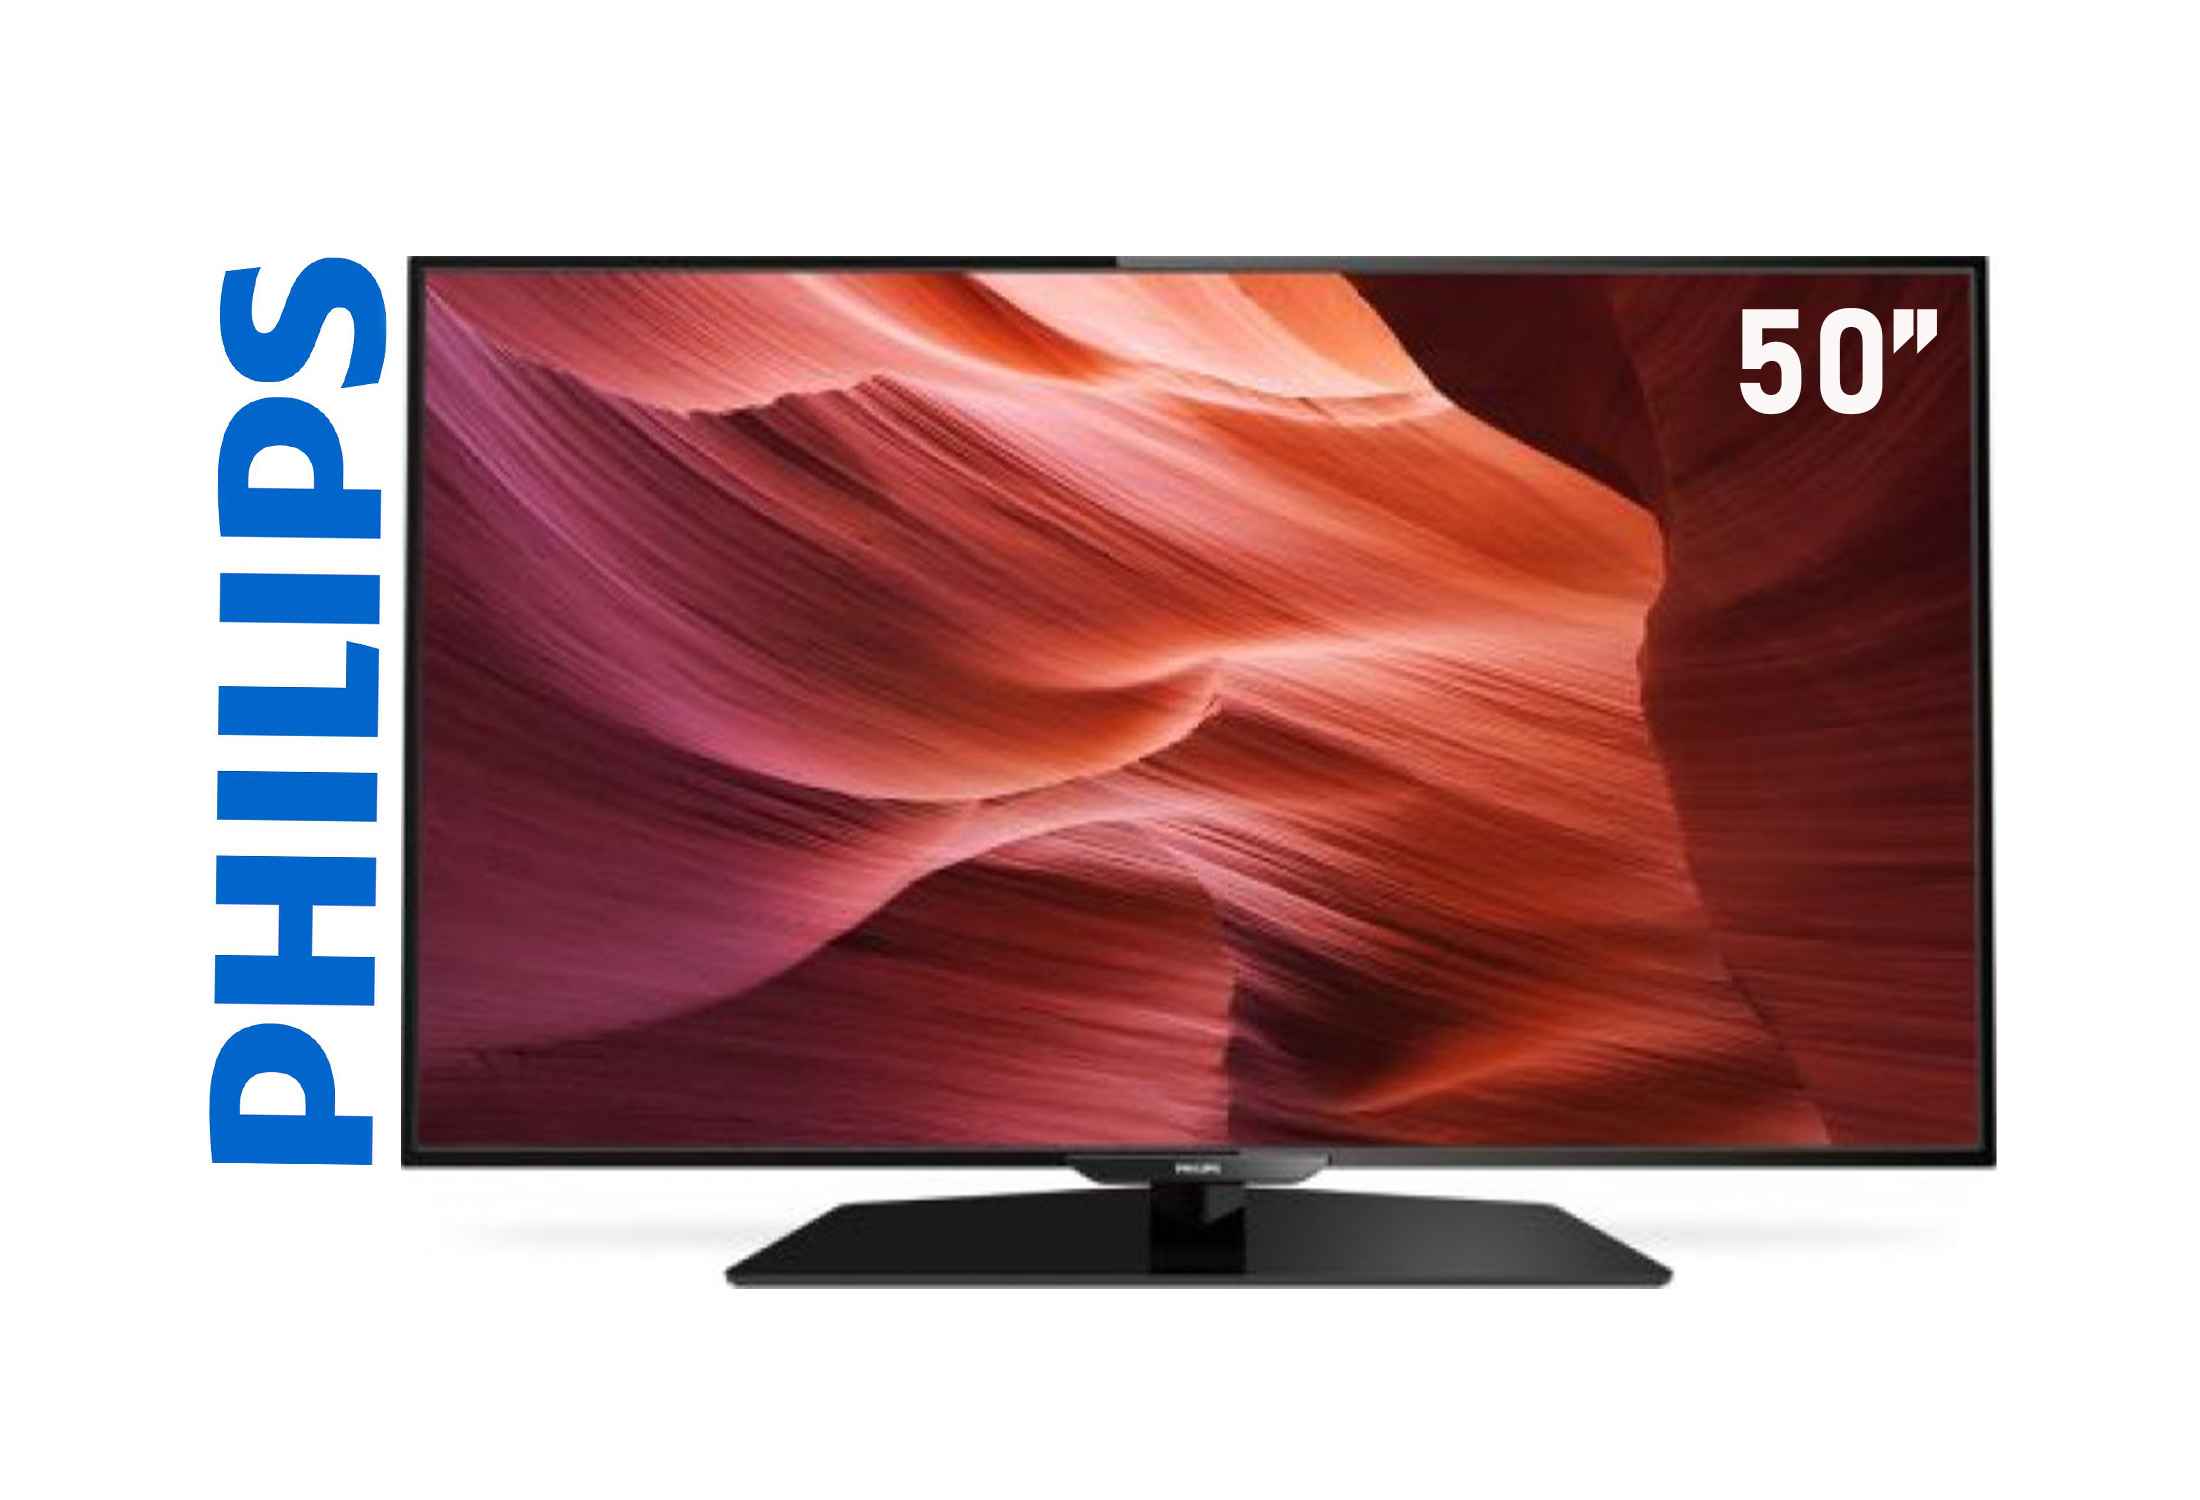 Philips 50PFT5300/12 50-inch FHD Smart DVB-T/T2/C No Stand